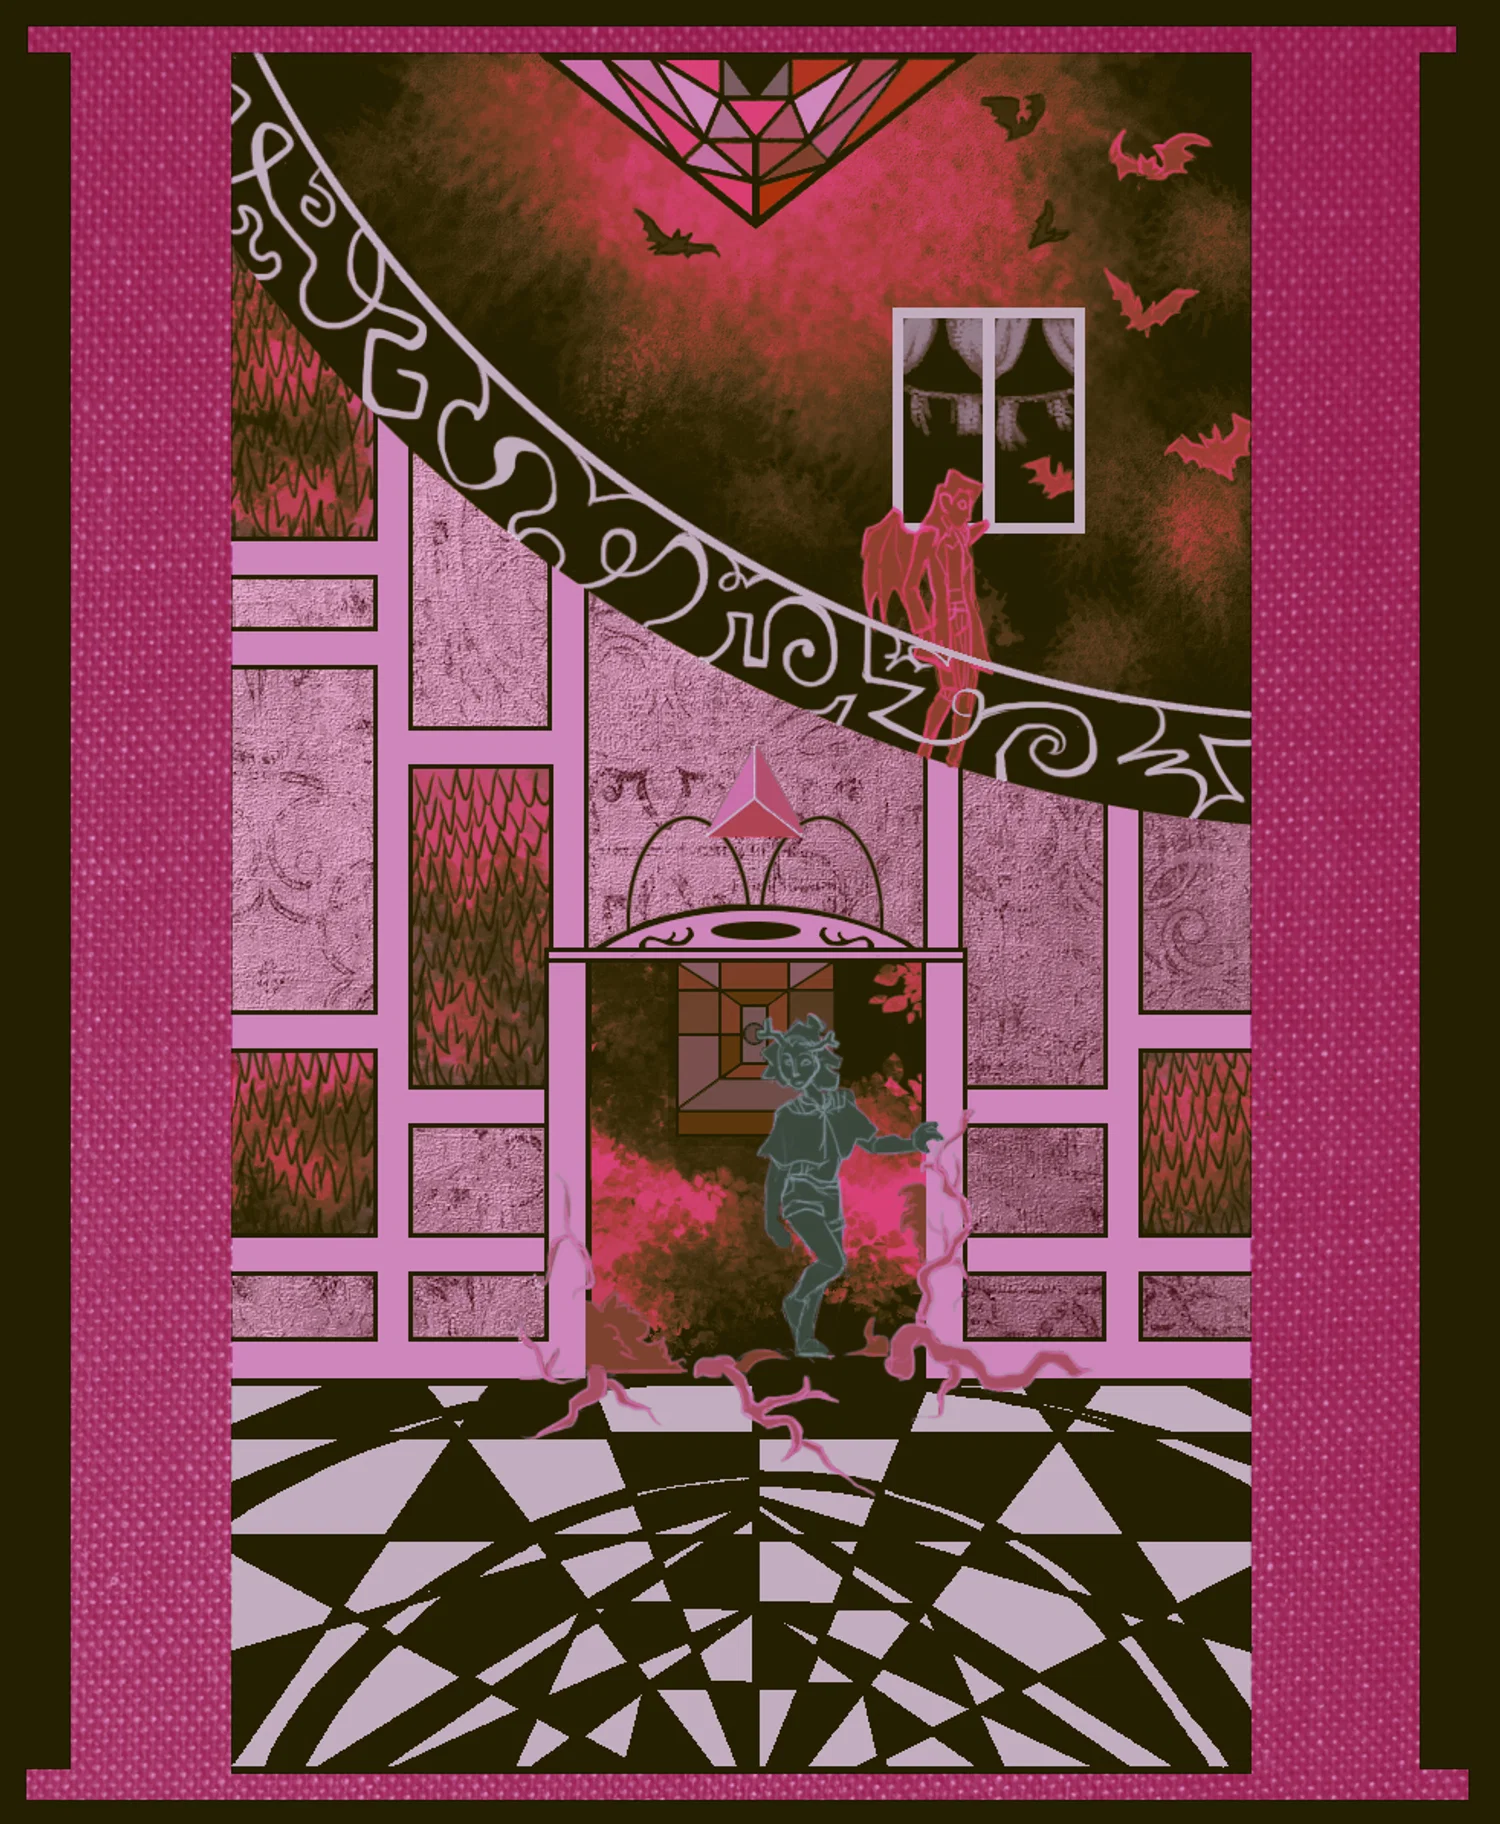 A pink illustrated poster depicting a room with two characters, one in the doorway and one on the staircase above.